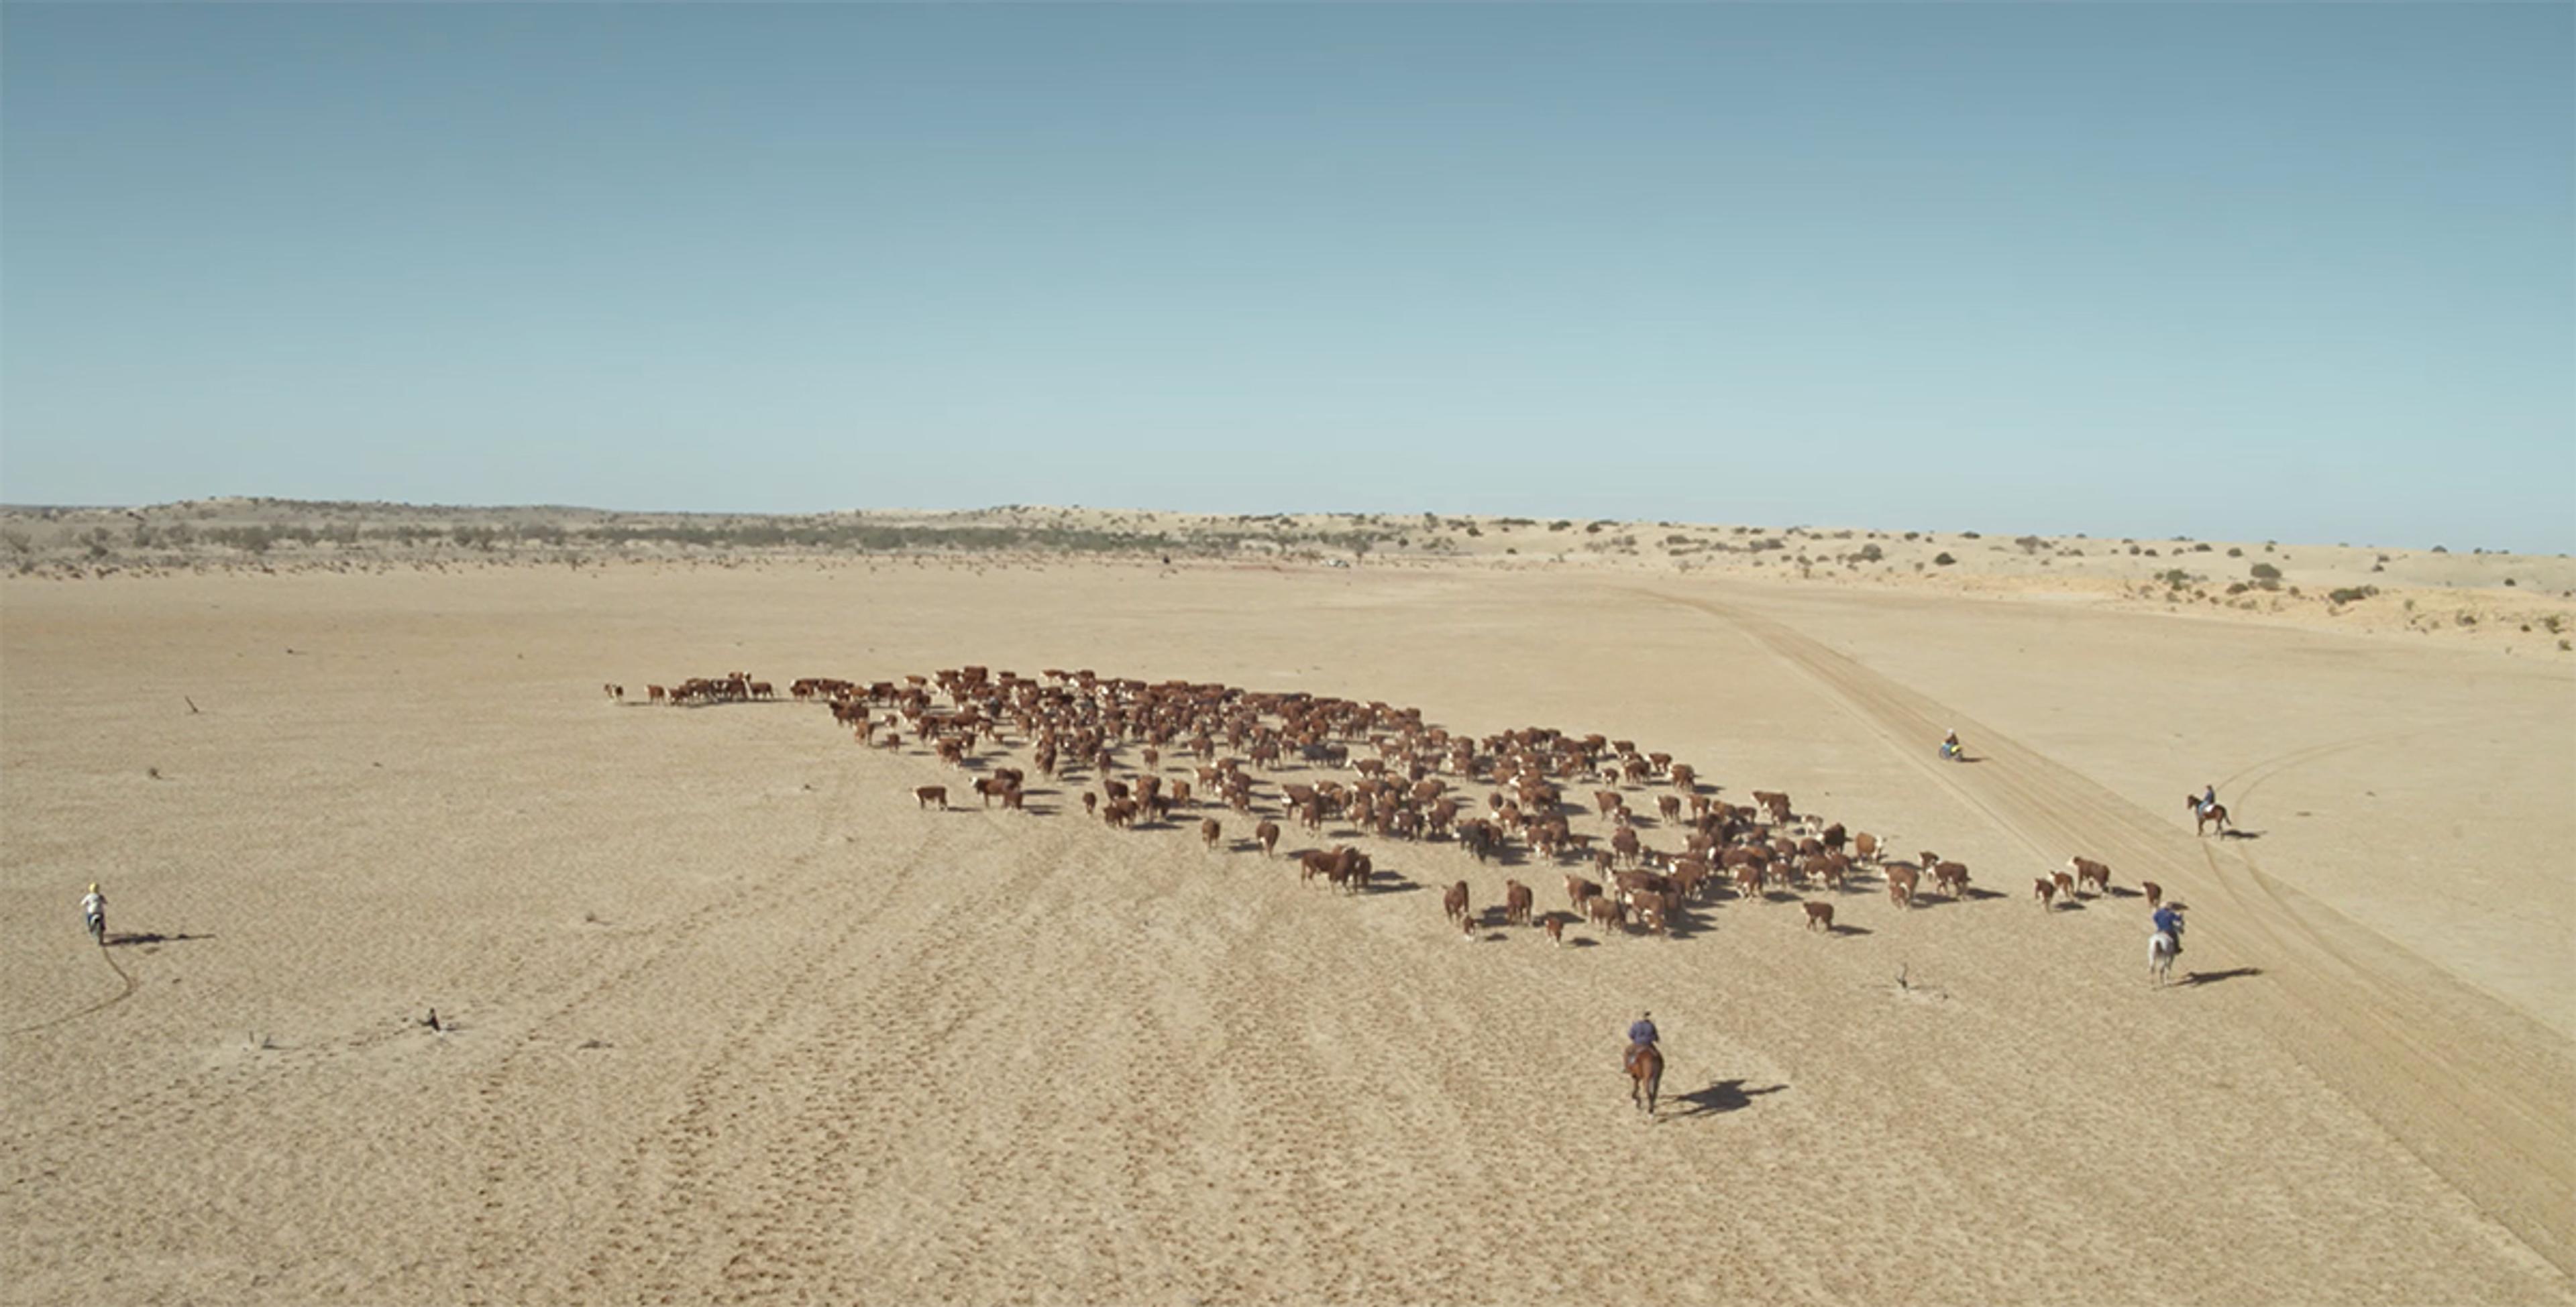 A herd of cows is herded by cowboys on horses and dirt bikes across a sandy stretch of land toward a green stretch in the distance.